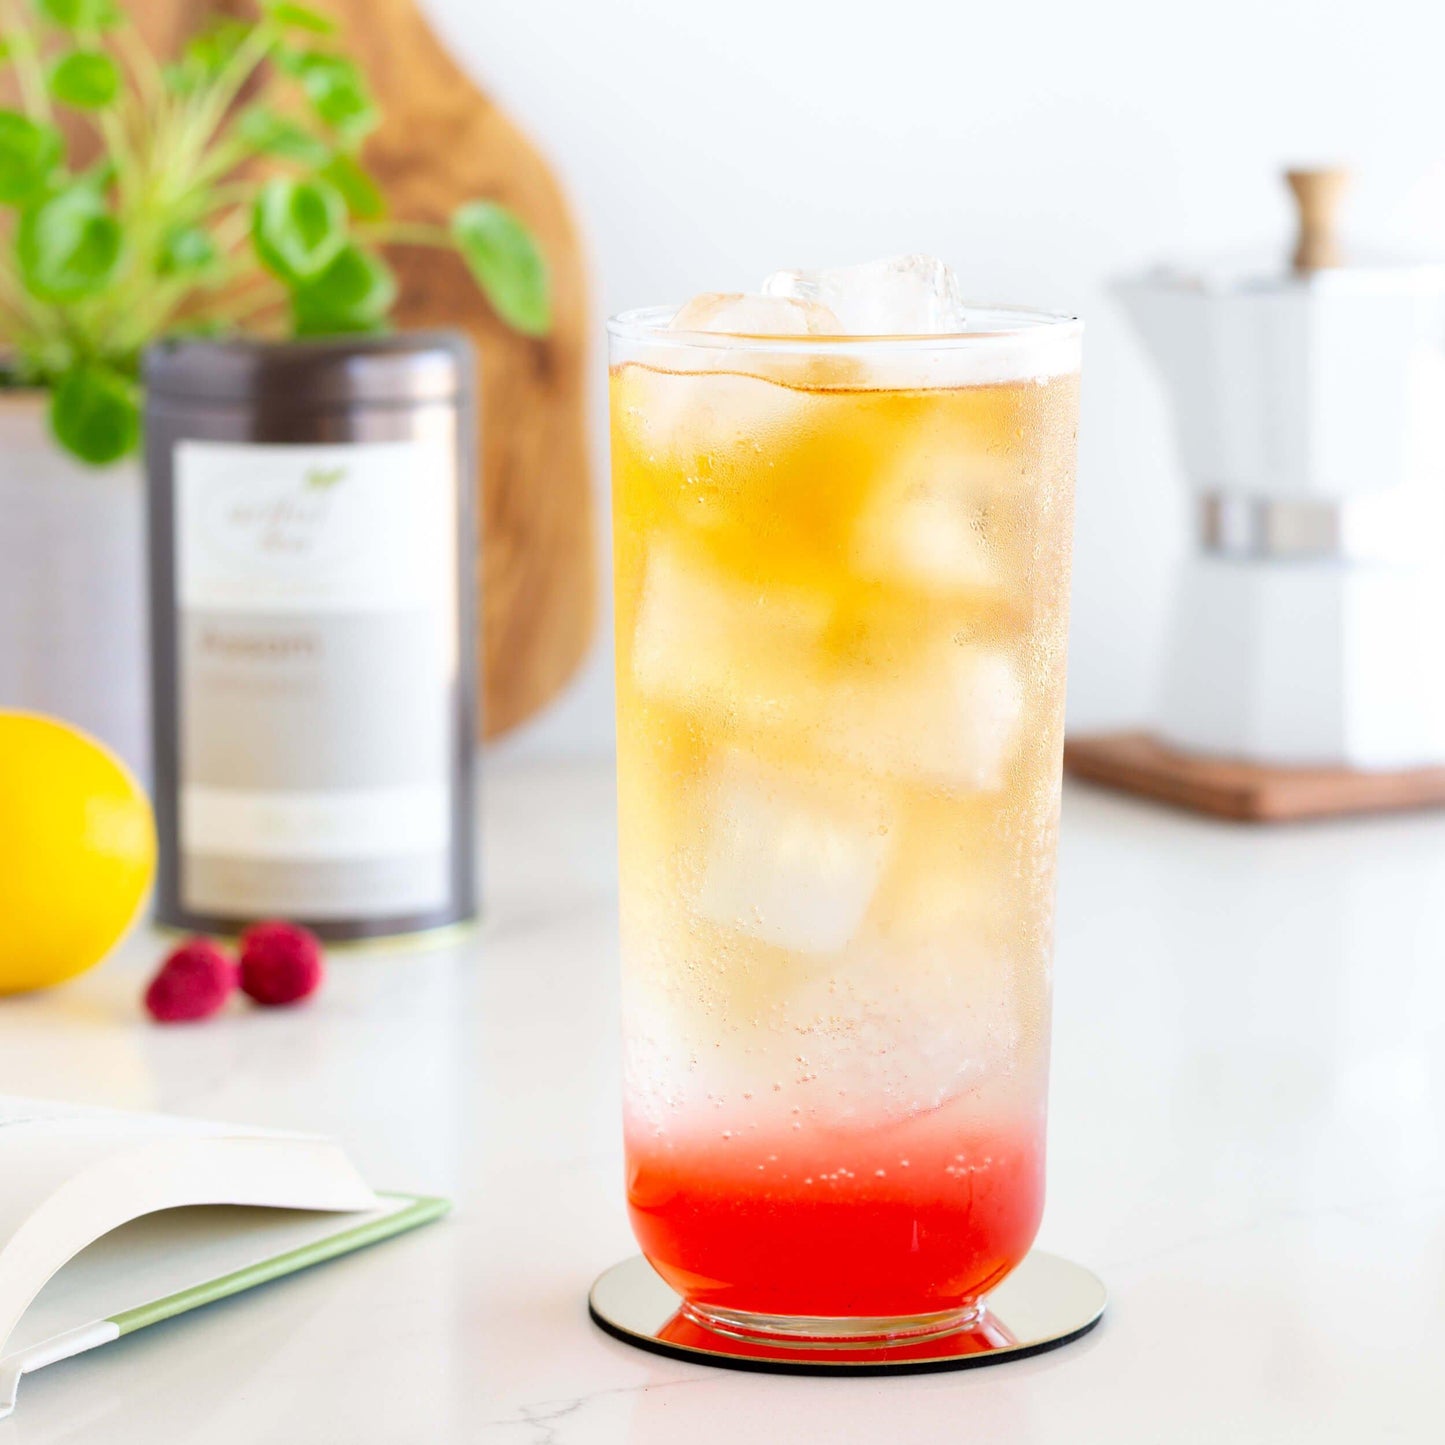 Sparkling Assam Tea with Raspberry Lemon Syrup shown in a glass with ice